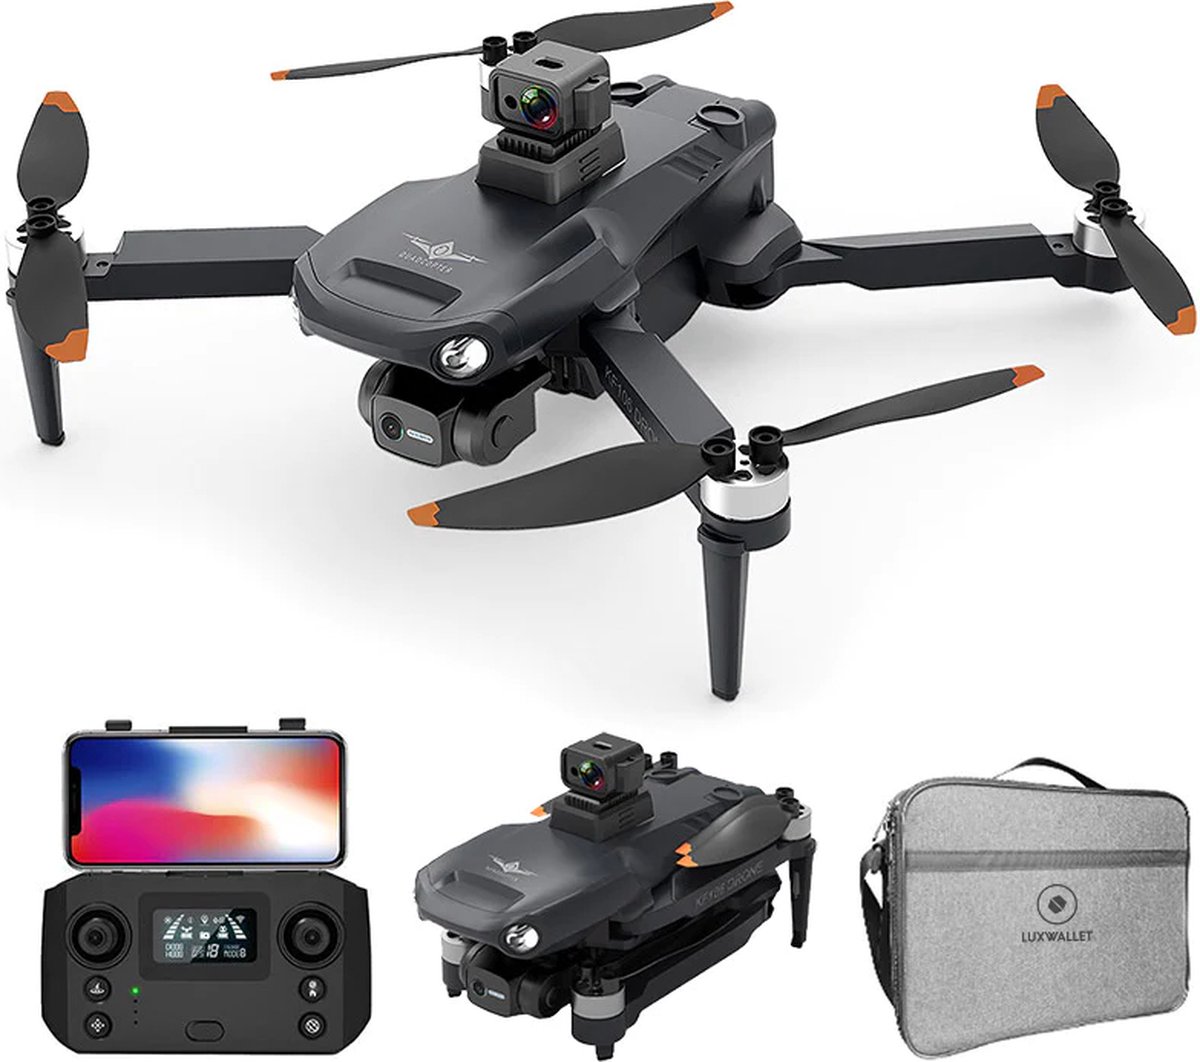 LUXWALLET Libra X Dodge - 5Ghz Quadcopter Drone 1.2km - Full Hd Camera - Obstakel Ontwijking - 3 As Gimbal - Camera - GPS - IOS / Android App